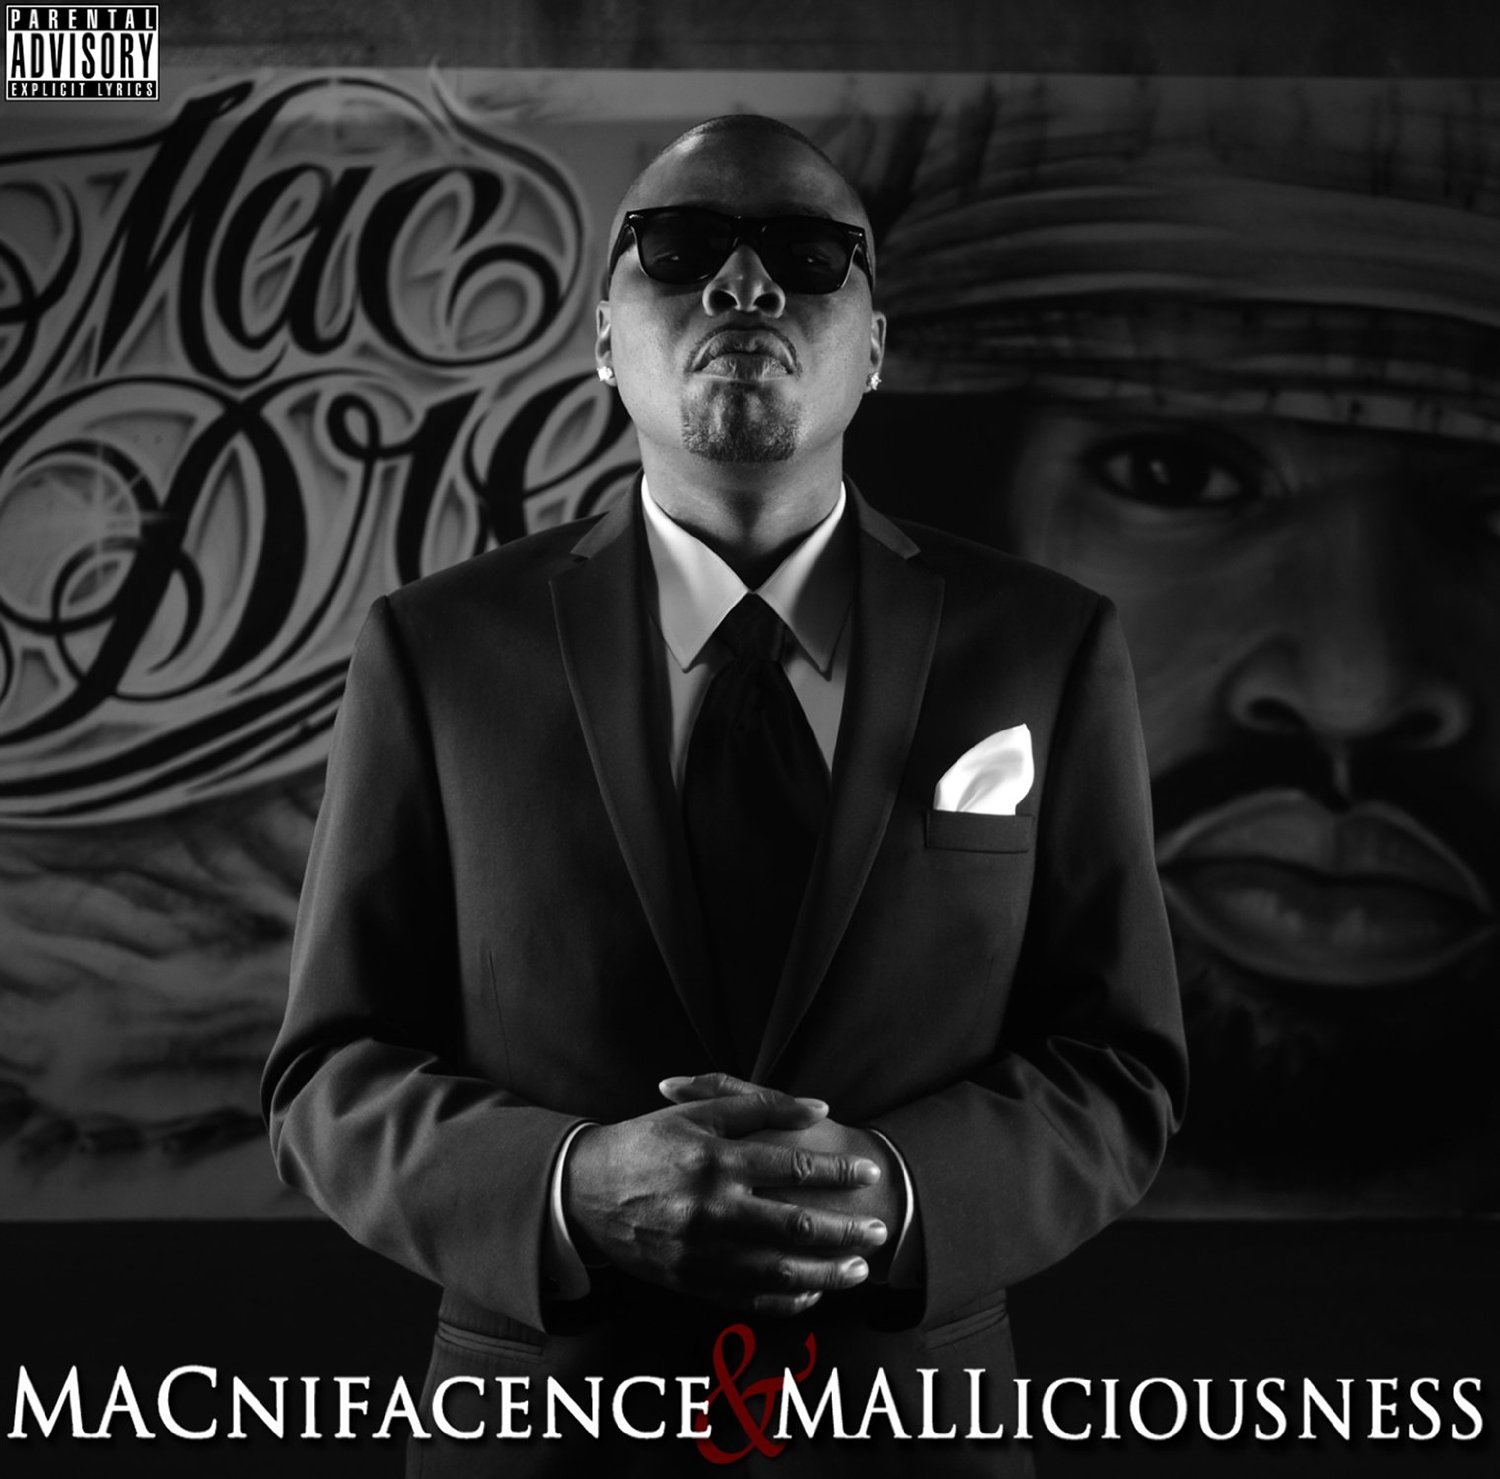 News Added Feb 17, 2014 One of Mac Mall's first singles was a song called "Ghetto Theme", which had a music video directed by Tupac Shakur in 1994. He was also longtime friends with Mac Dre, who was his mentor early on in his career. The two repaired their friendship a couple of years before […]